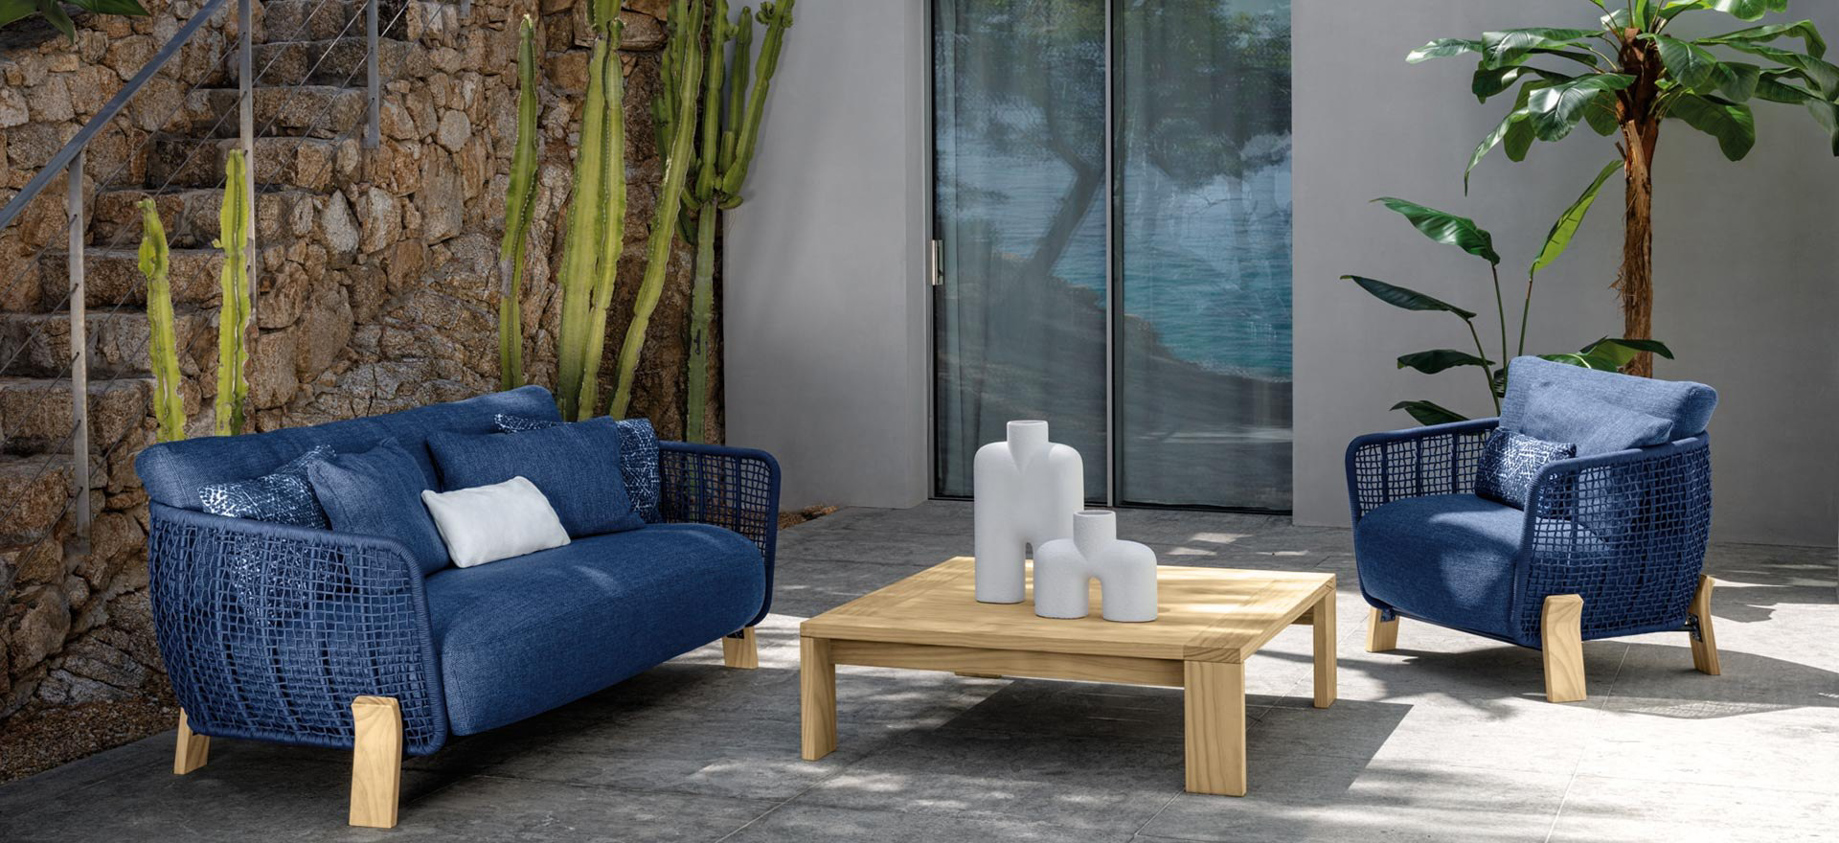 Argo Outdoor Furniture Collection by Talenti Outdoor Living Italy – Palomba Serafini Associati